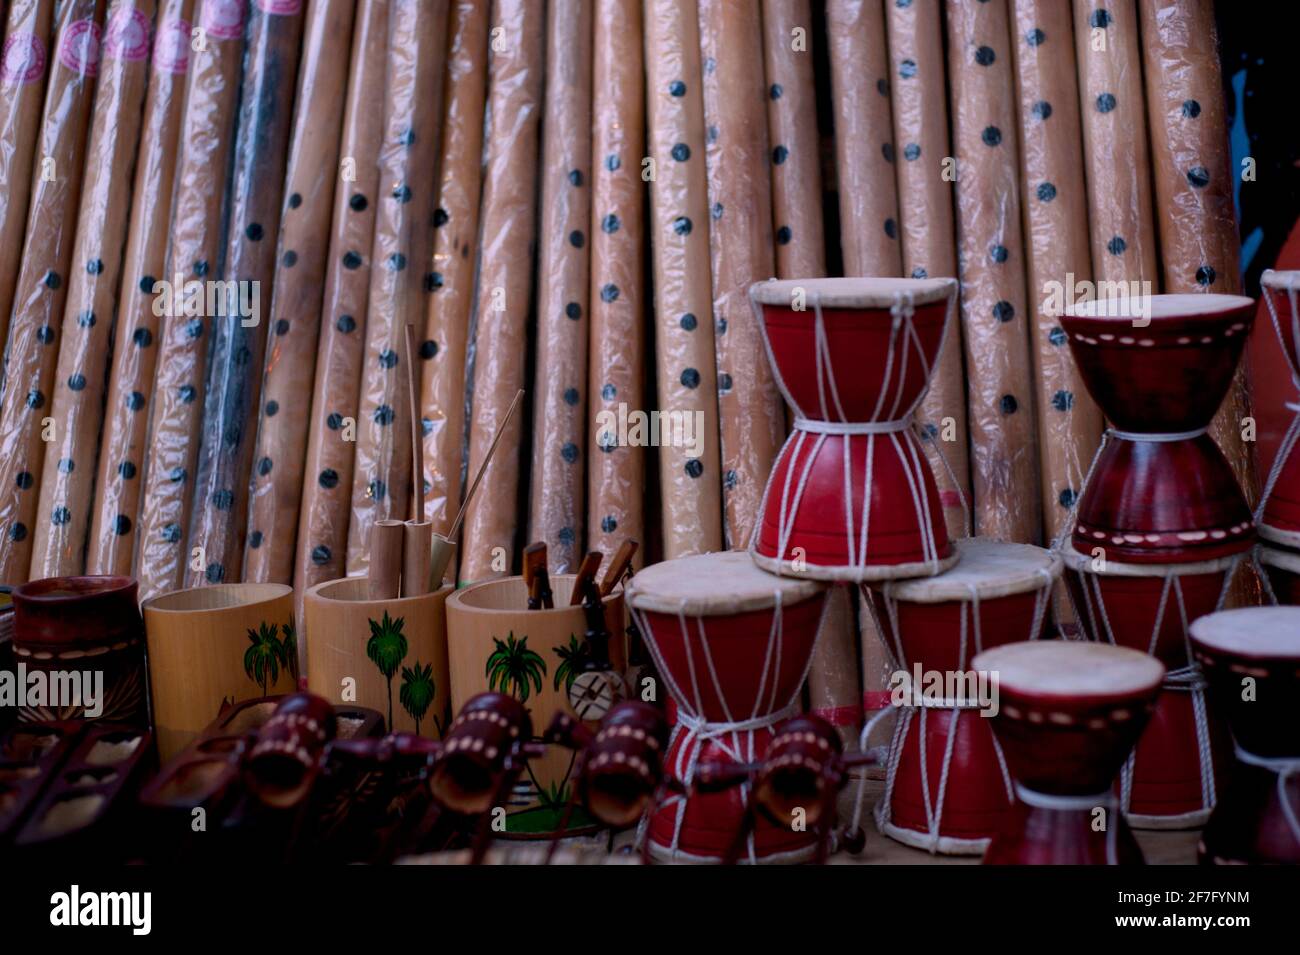 Bamboo made Handicrafts, Bangladeshi people attend a rally in celebration of the Bengali New Year or 'Pohela Baishakh'. Stock Photo